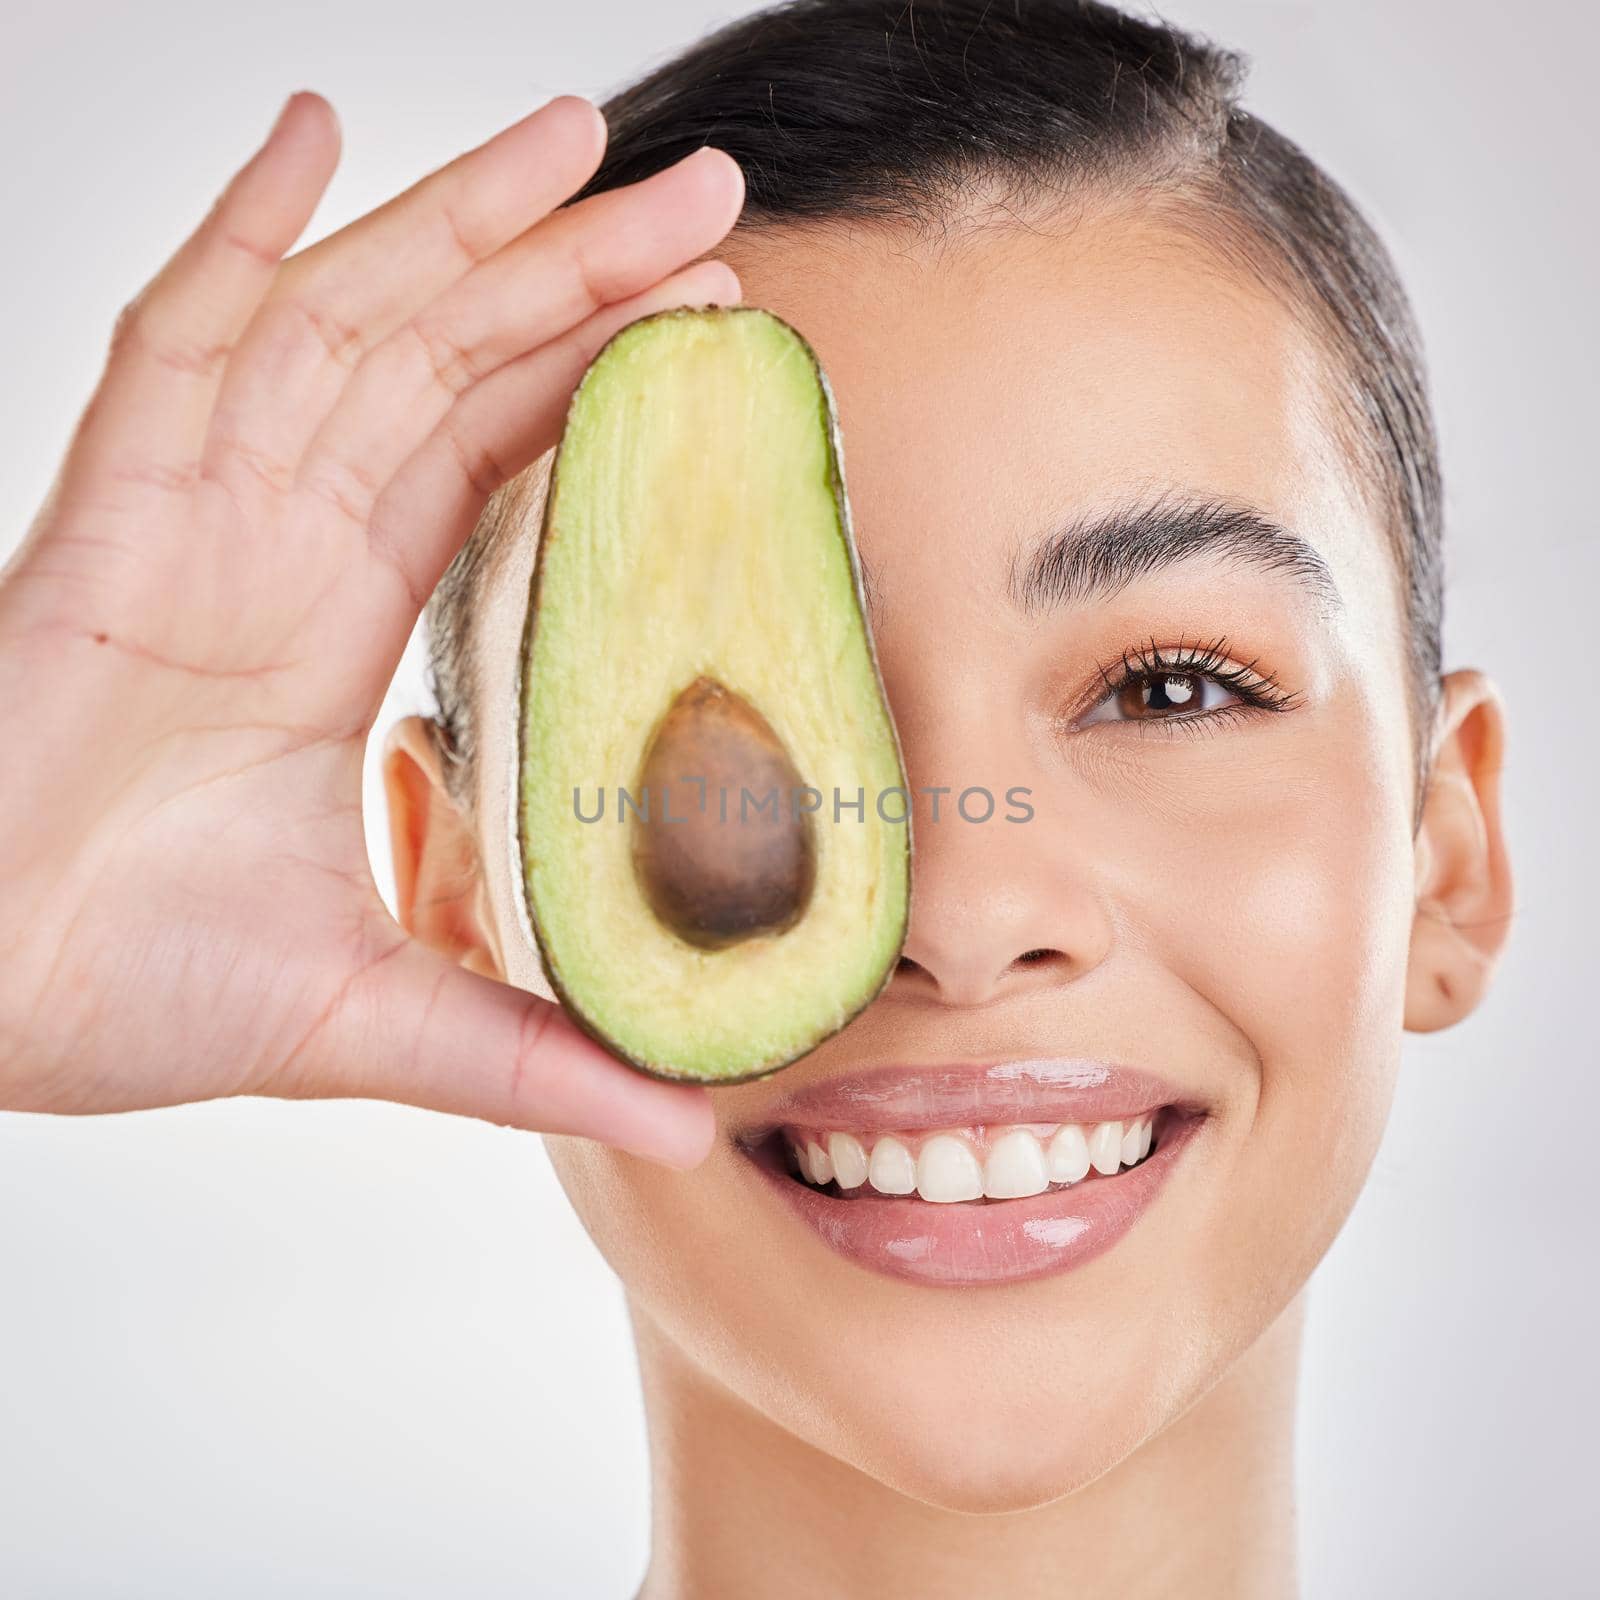 Feed your skin what it needs. Studio shot of a young woman posing with half an avocado against a grey background. by YuriArcurs